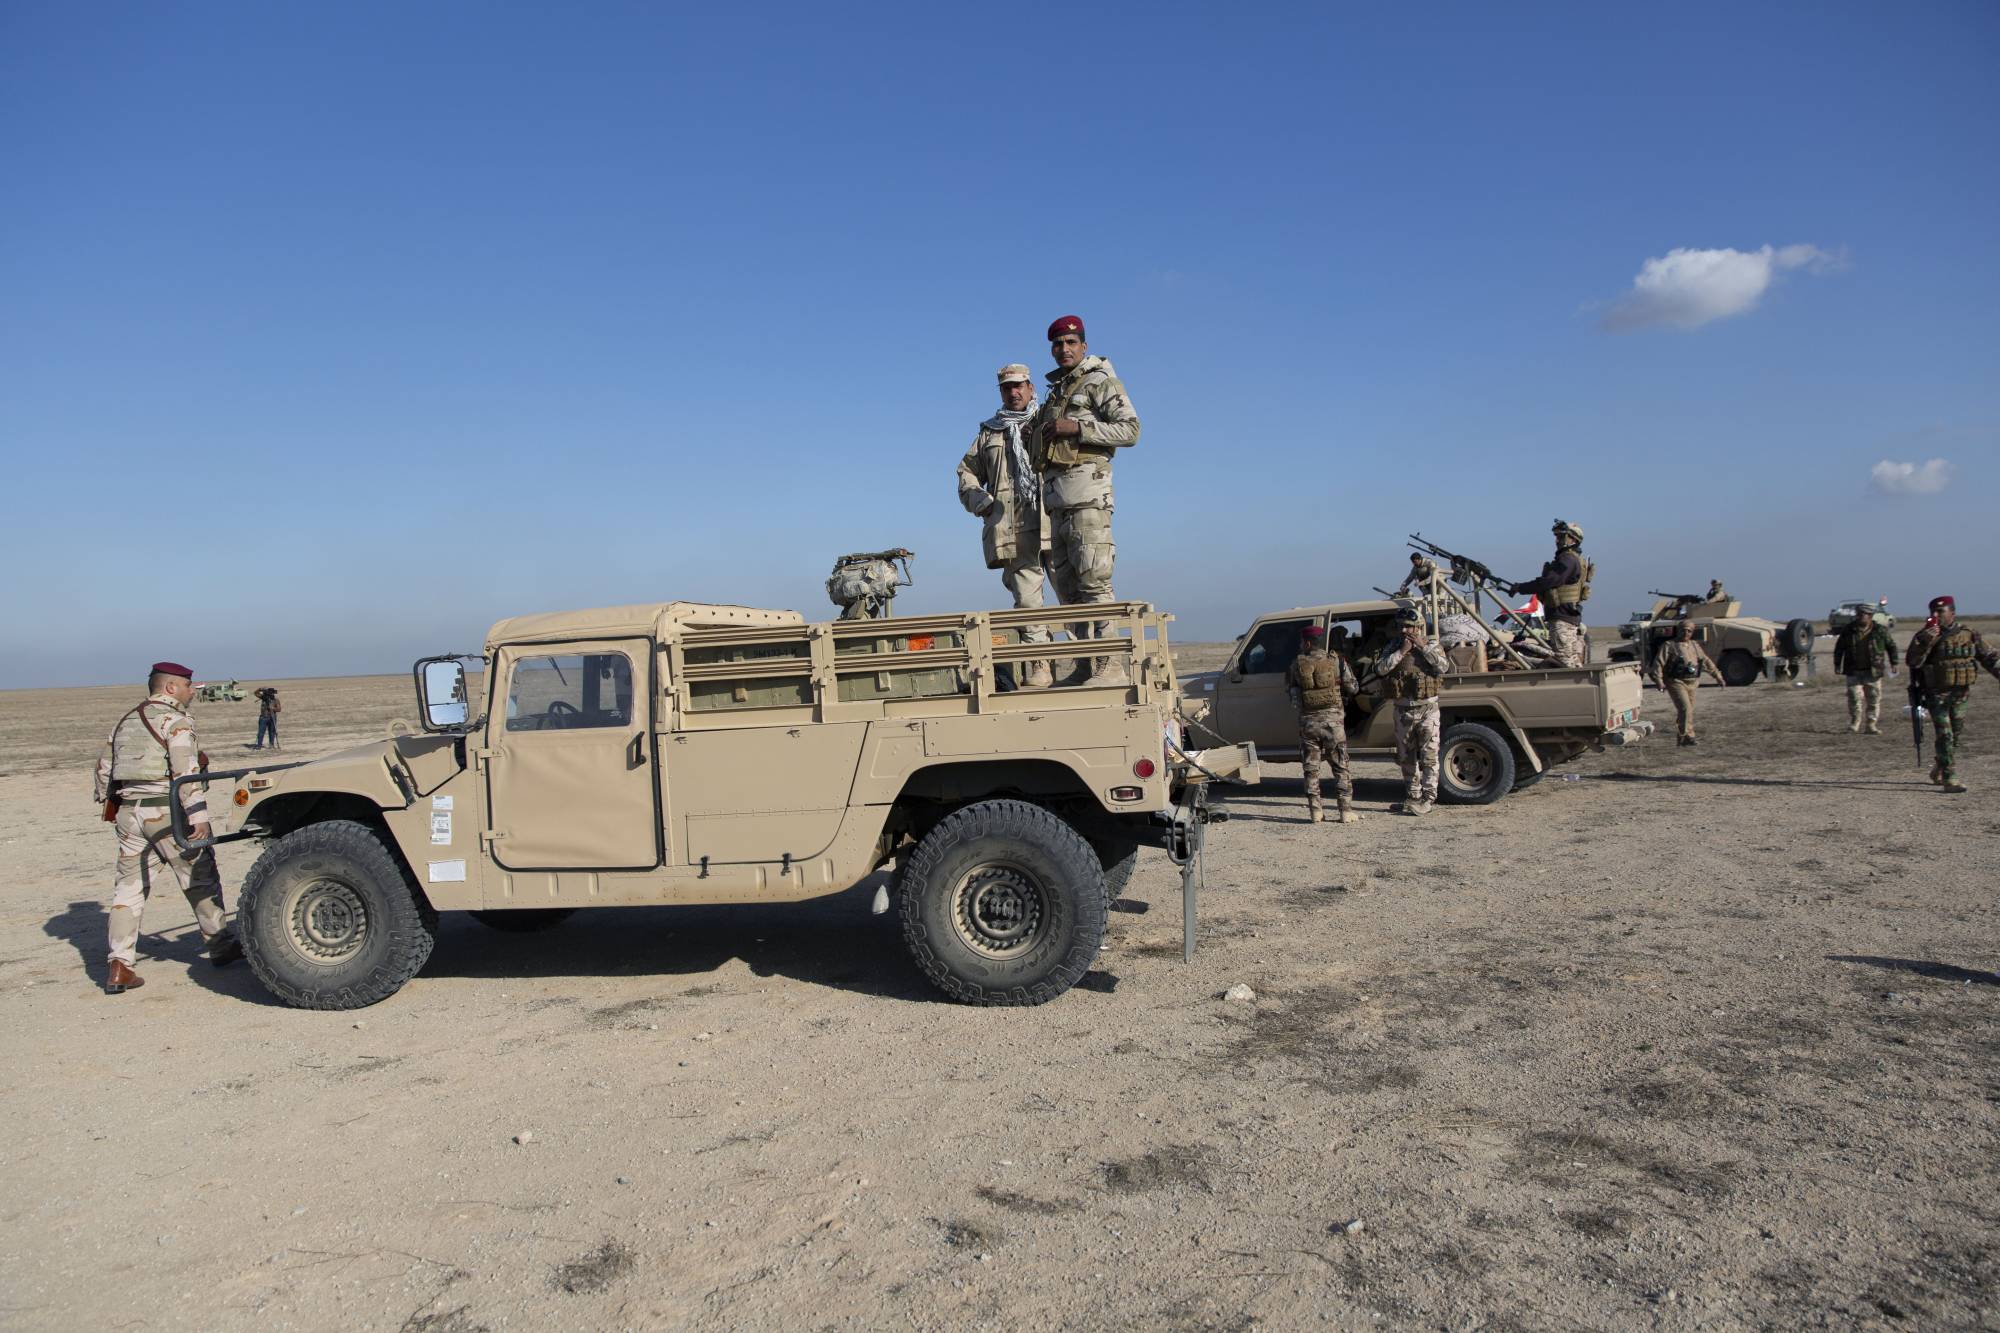 Iraqi army units are deployed during military operations of the Iraqi Army's Seventh Brigade in Anbar, Iraq, Sunday, Dec. 29, 2019. An Iraqi general said Sunday that security has been beefed up around the Ain al-Asad air base, a sprawling complex in the western Anbar desert that hosts U.S. forces, following a series of attacks. (AP Photo/Nasser Nasser)